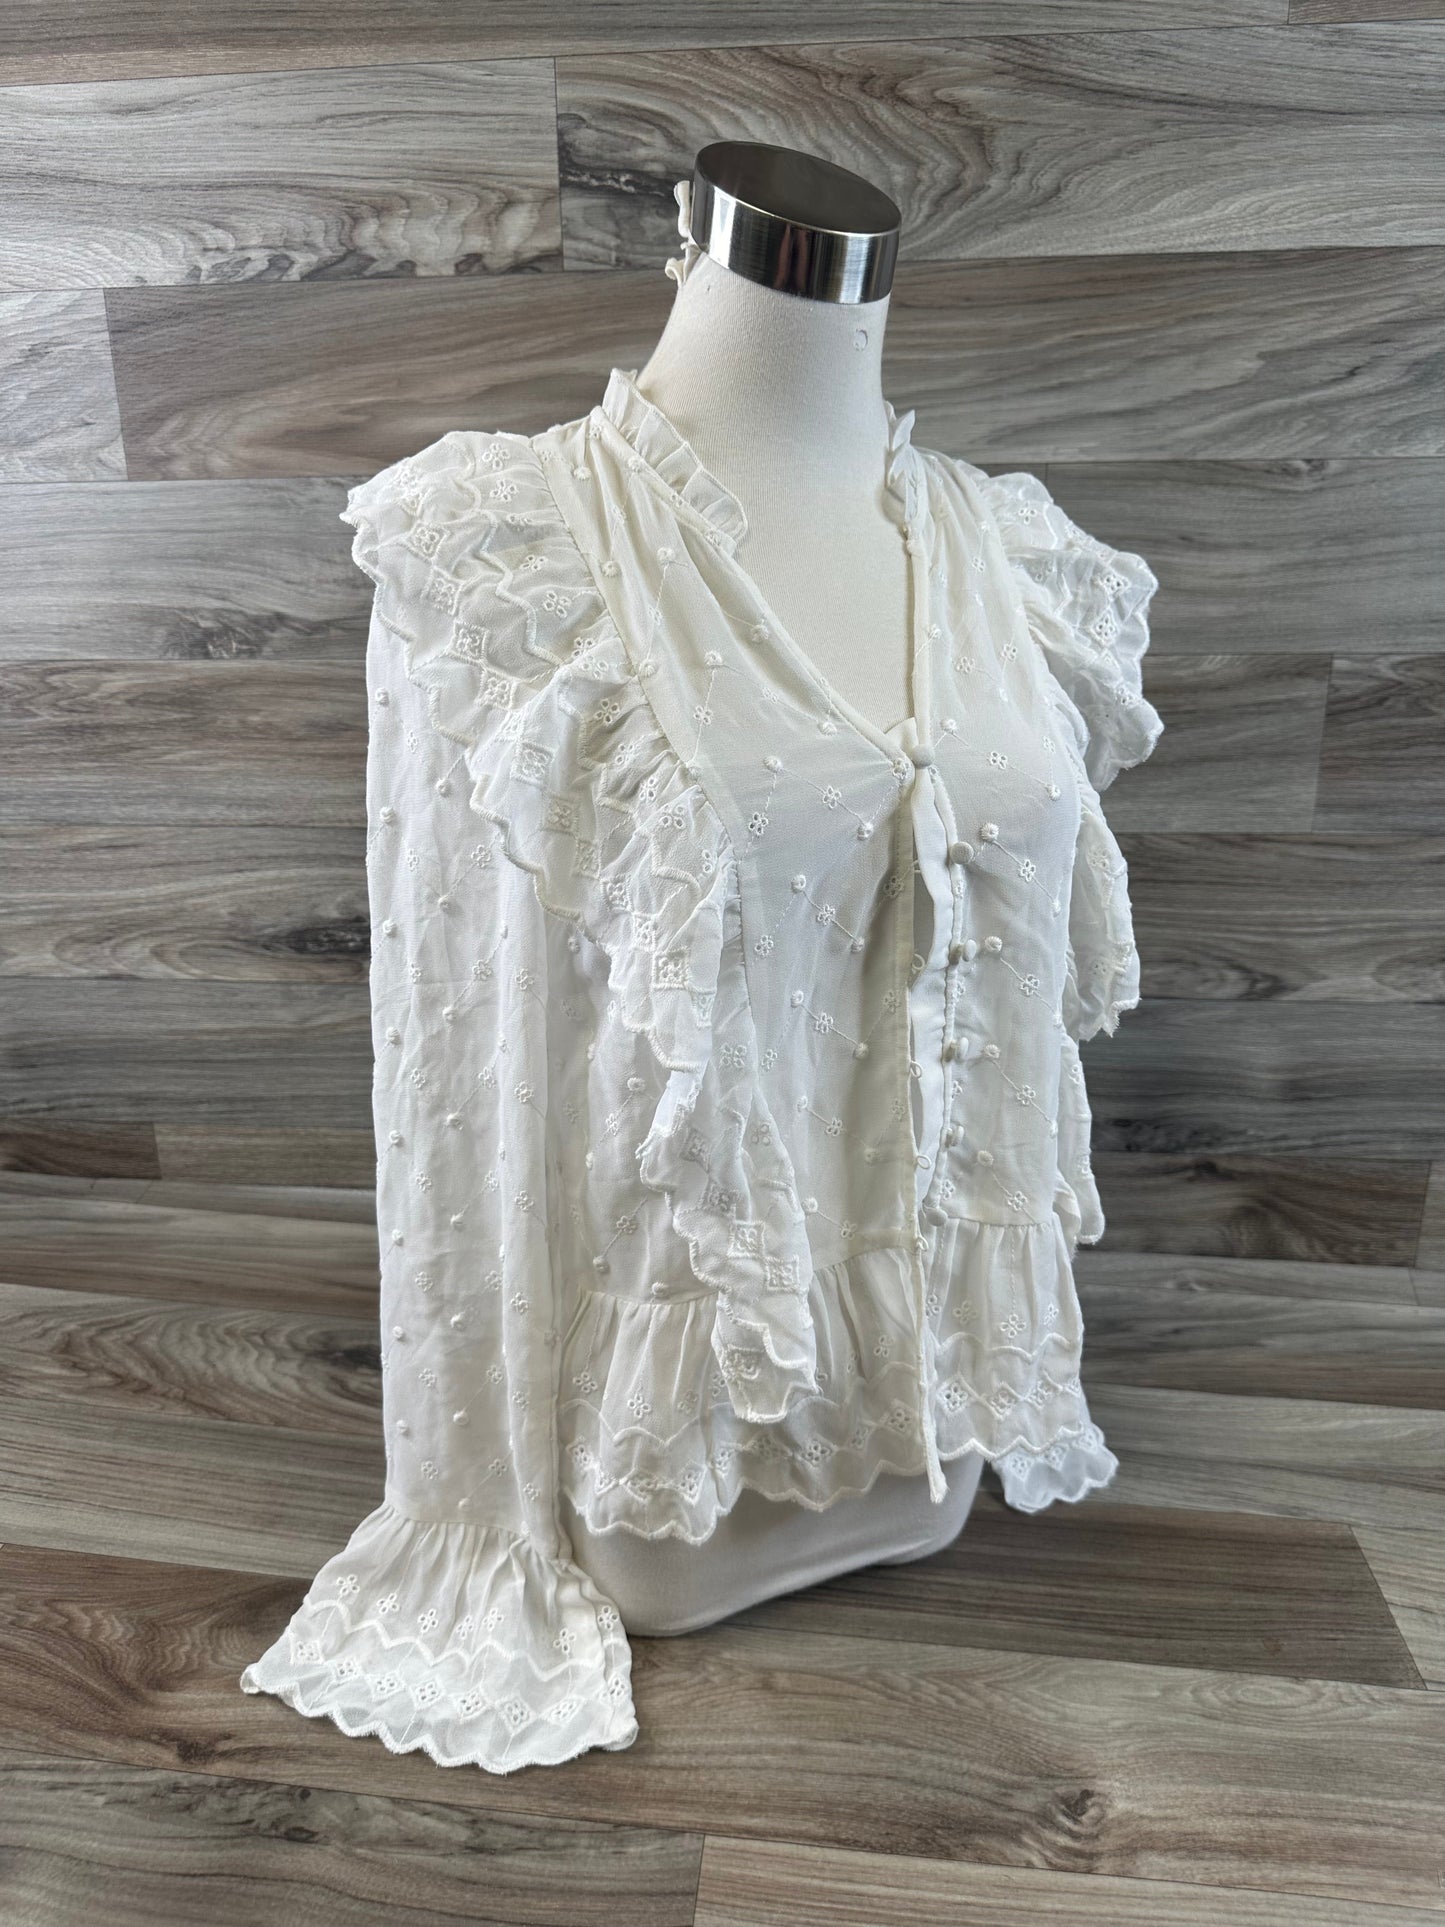 White Top Long Sleeve H&m, Size S